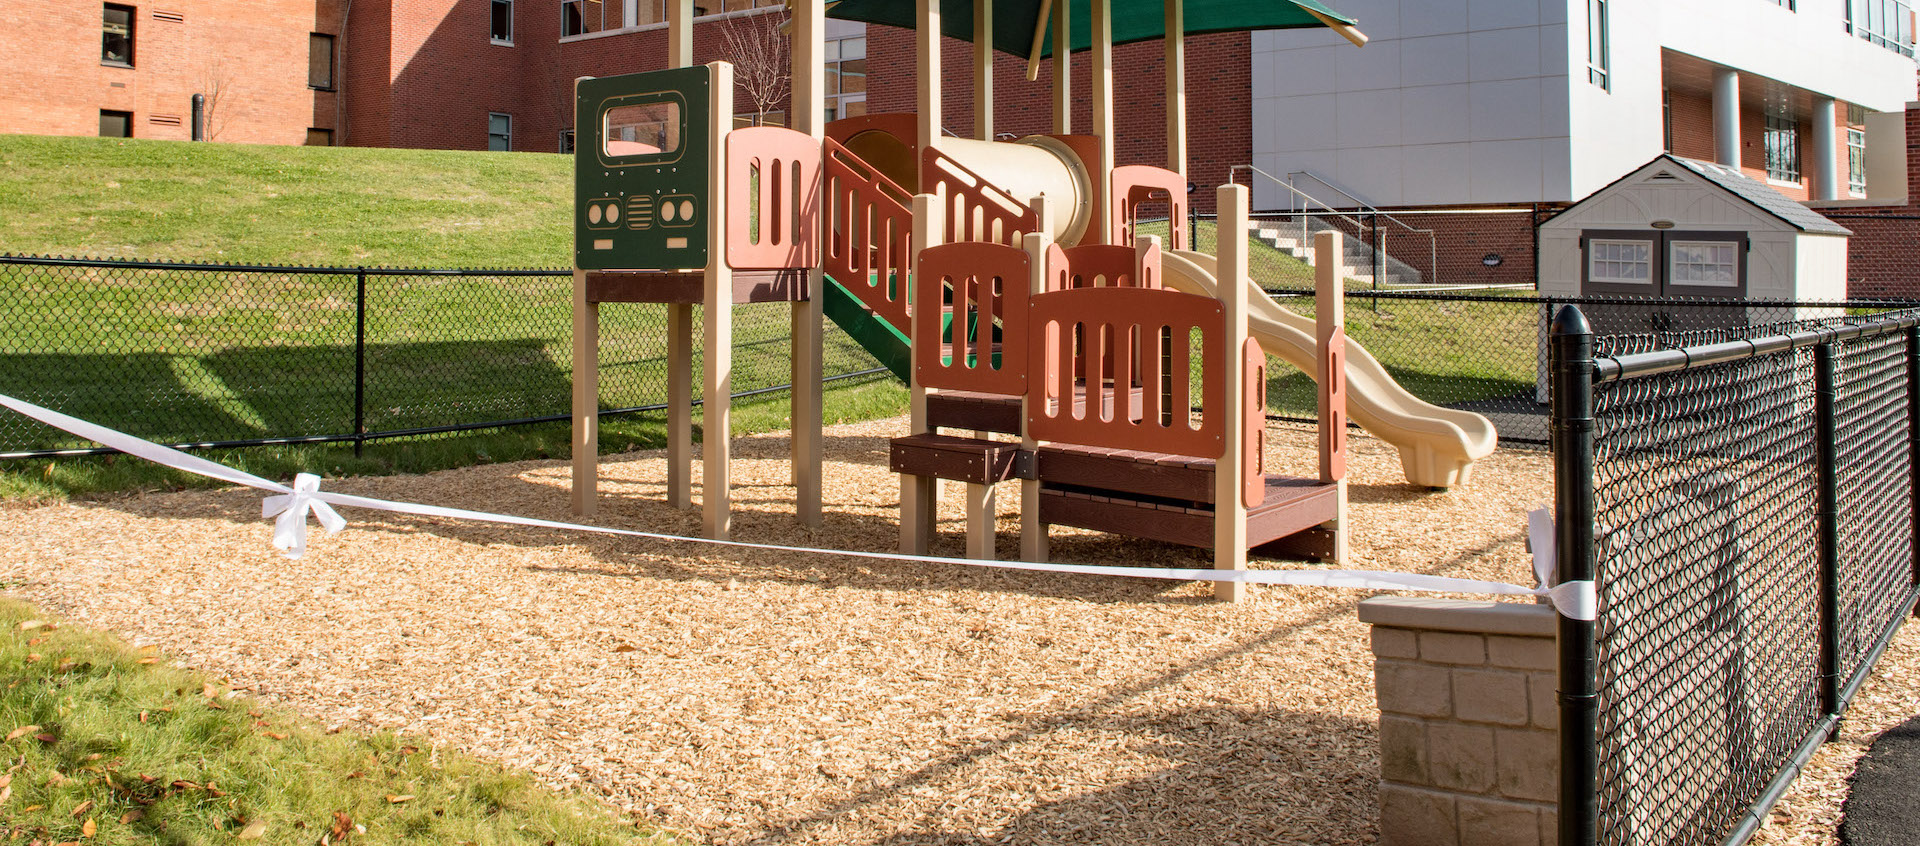 playground equipment outside on a sunny day